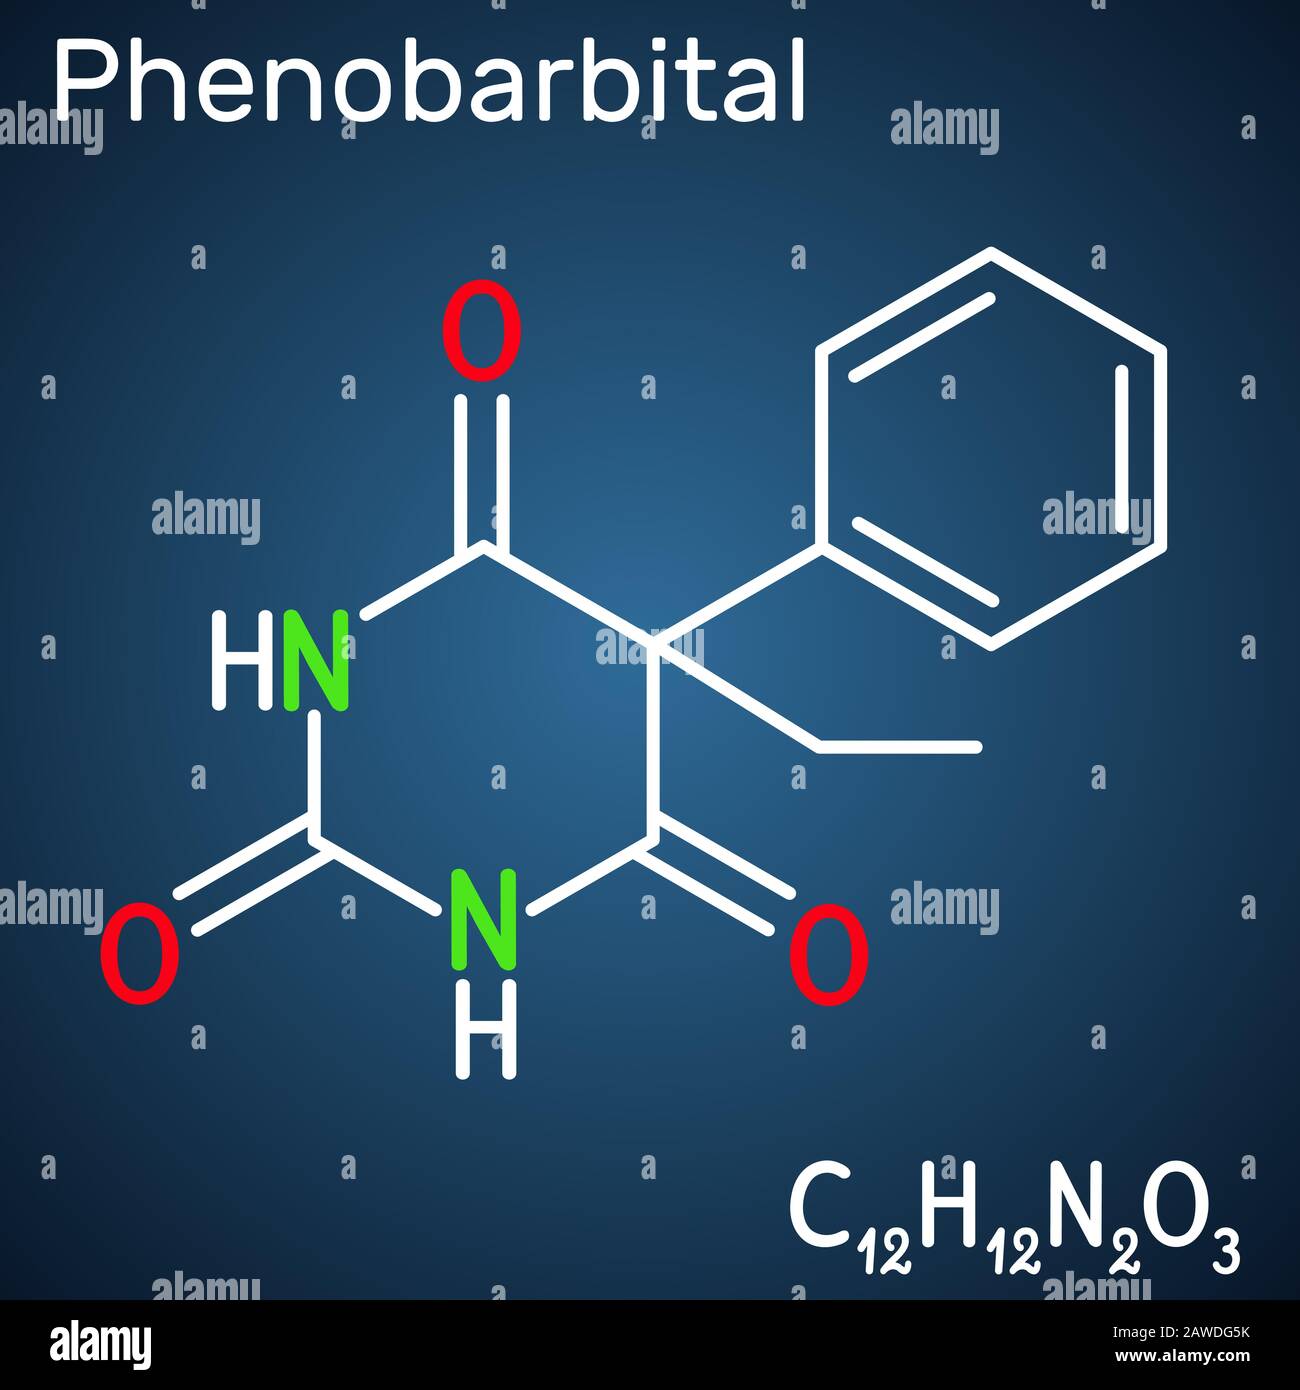 Phenobarbital, phenobarbitone or phenobarb, C12H12N2O3  molecule. It is a medication for the treatment of epilepsy. Structural chemical formula on the Stock Vector